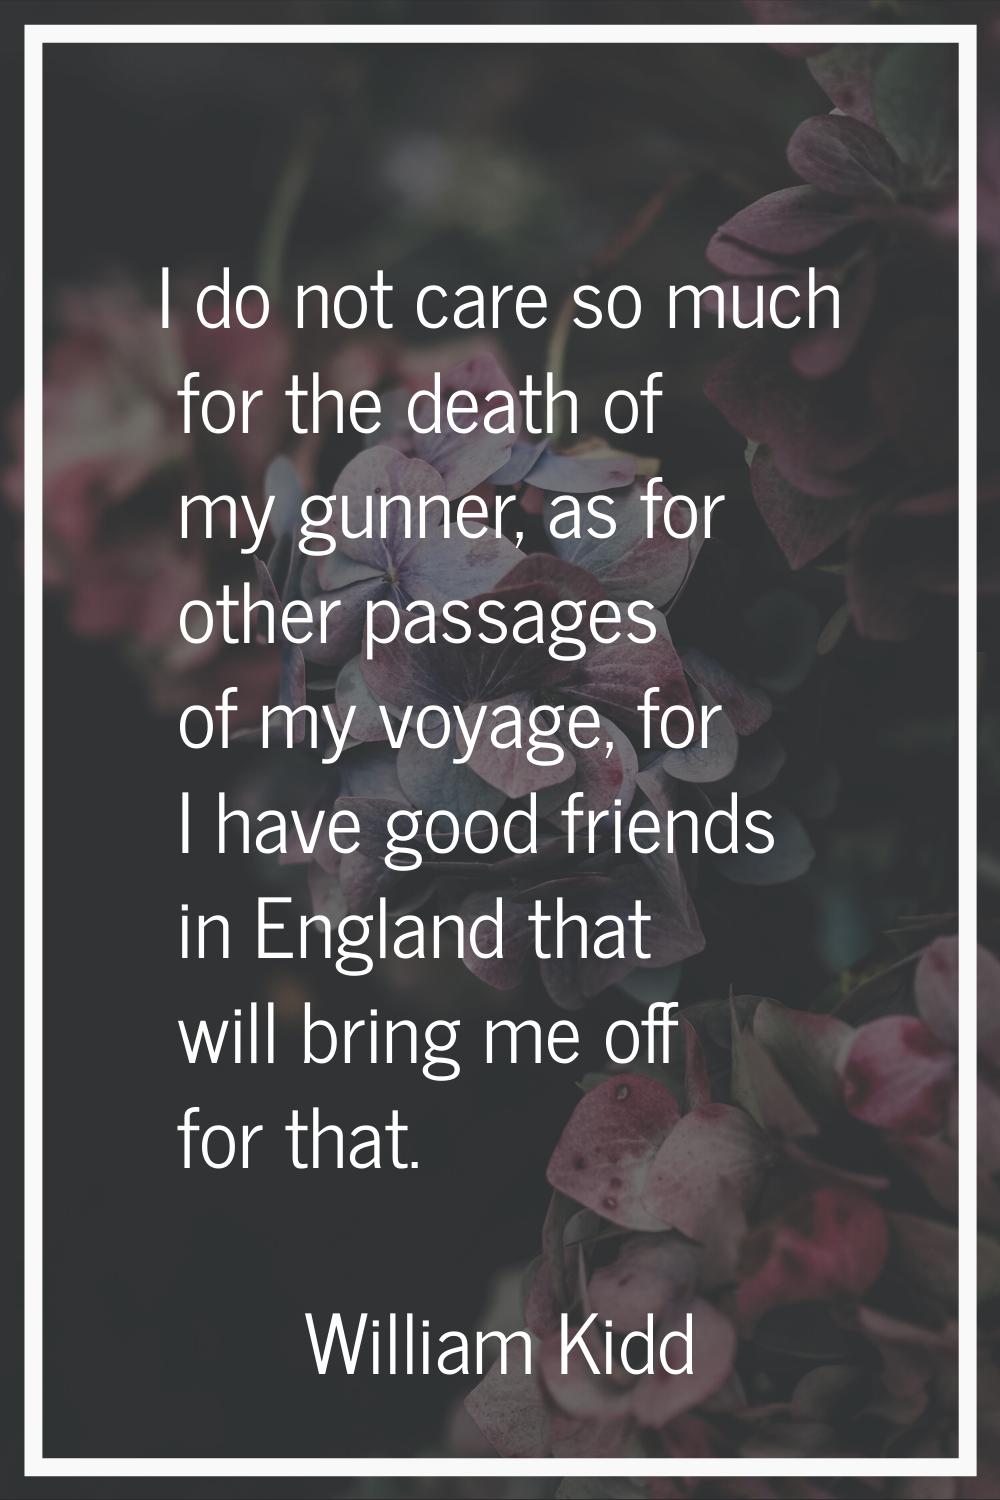 I do not care so much for the death of my gunner, as for other passages of my voyage, for I have go